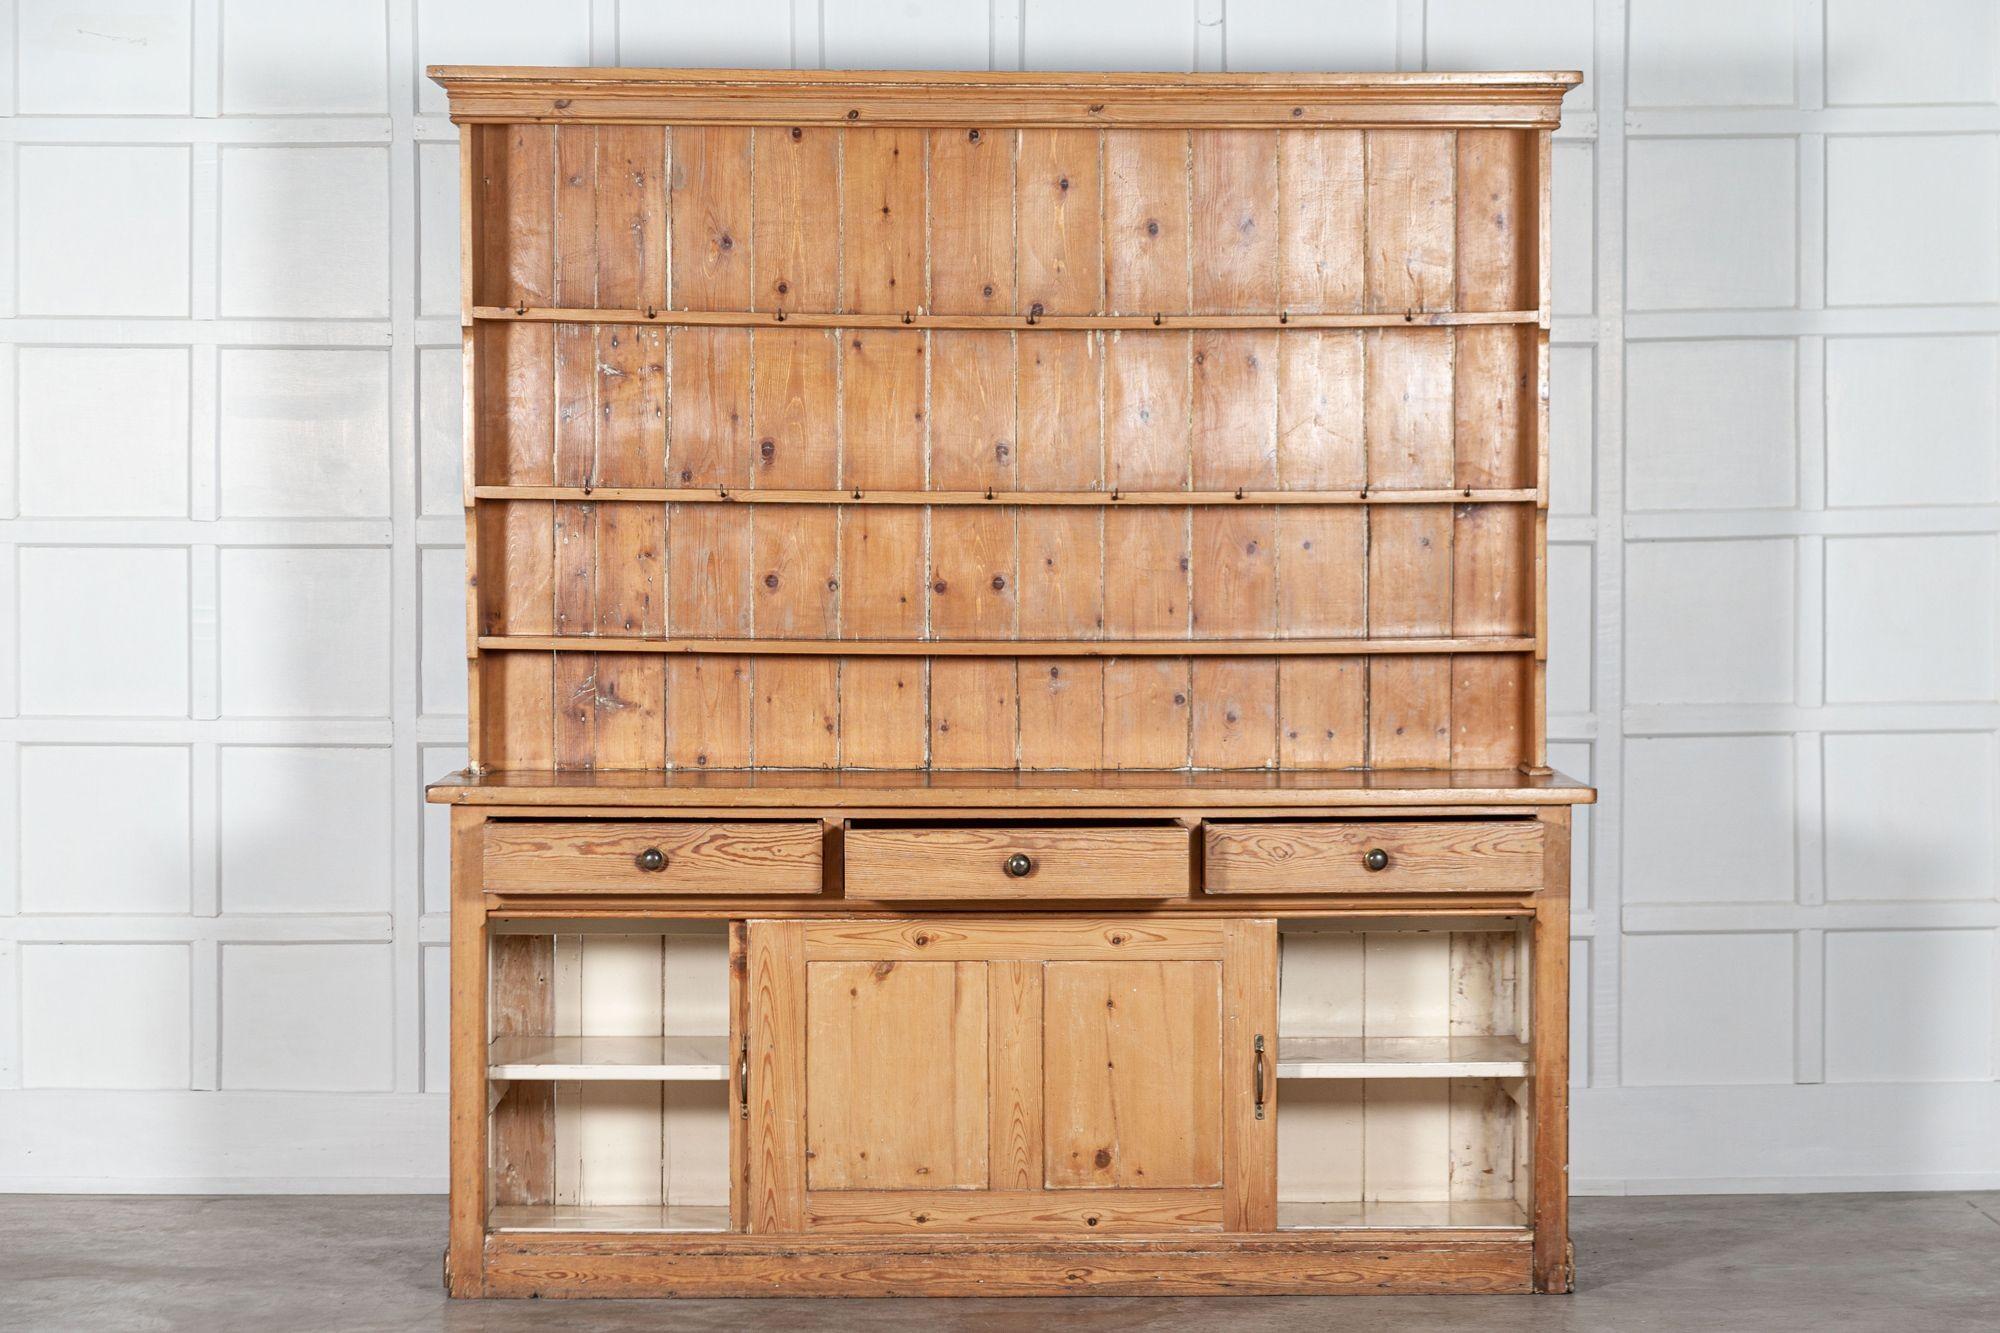 circa 1890
Large 19th century English pine waterfall dresser
We can also customise existing pieces to suit your scheme/requirements. We have our own workshop, restorers and finishers. From adapting to finishing pieces including, stripping,